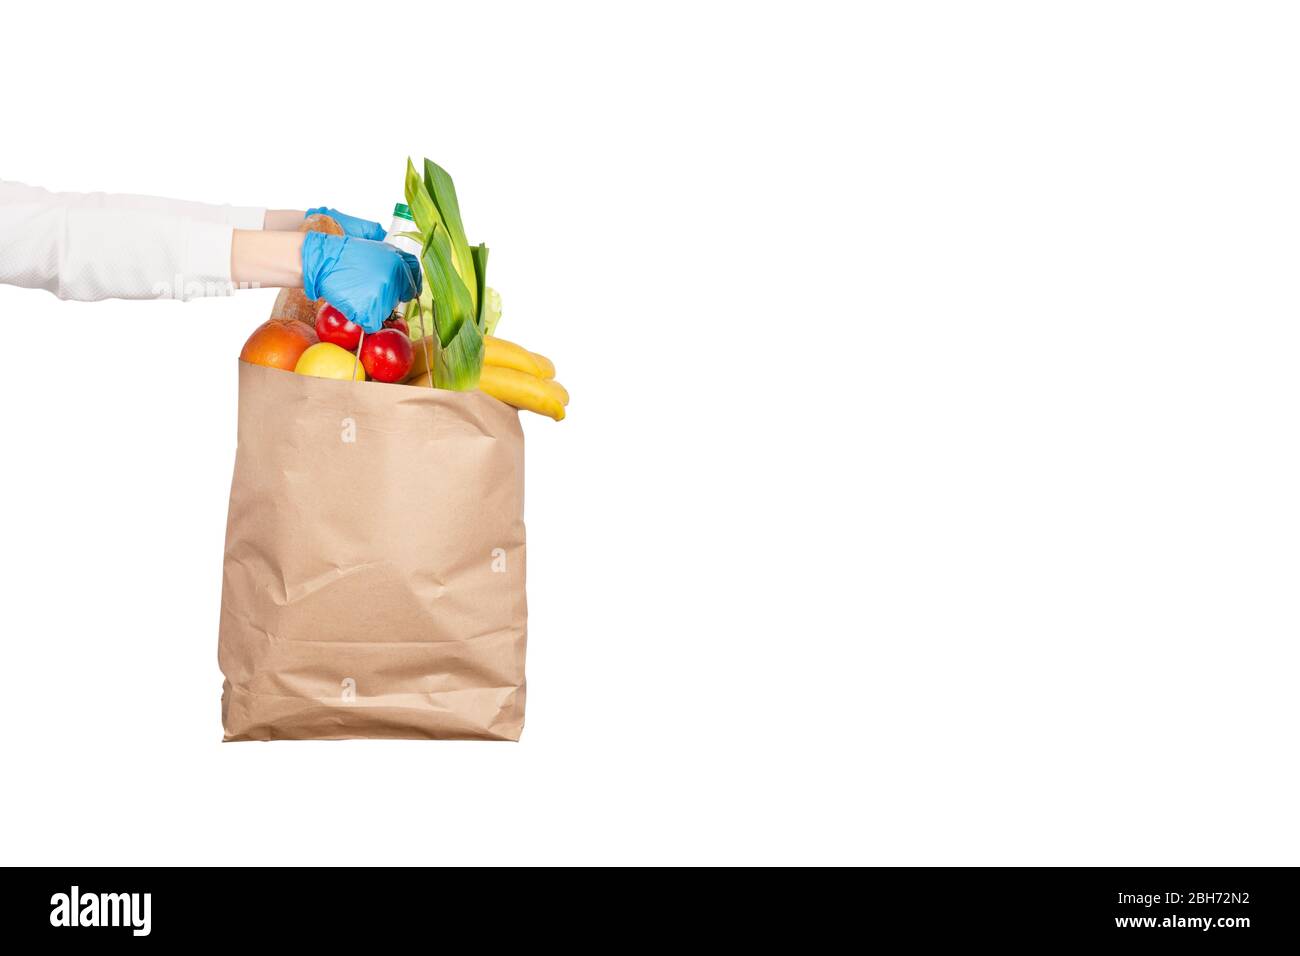 Safe food delivery or donation concept. Food delivery during coronavirus quarantine. Paper bag with different food ingredients such as fruits, vegetab Stock Photo